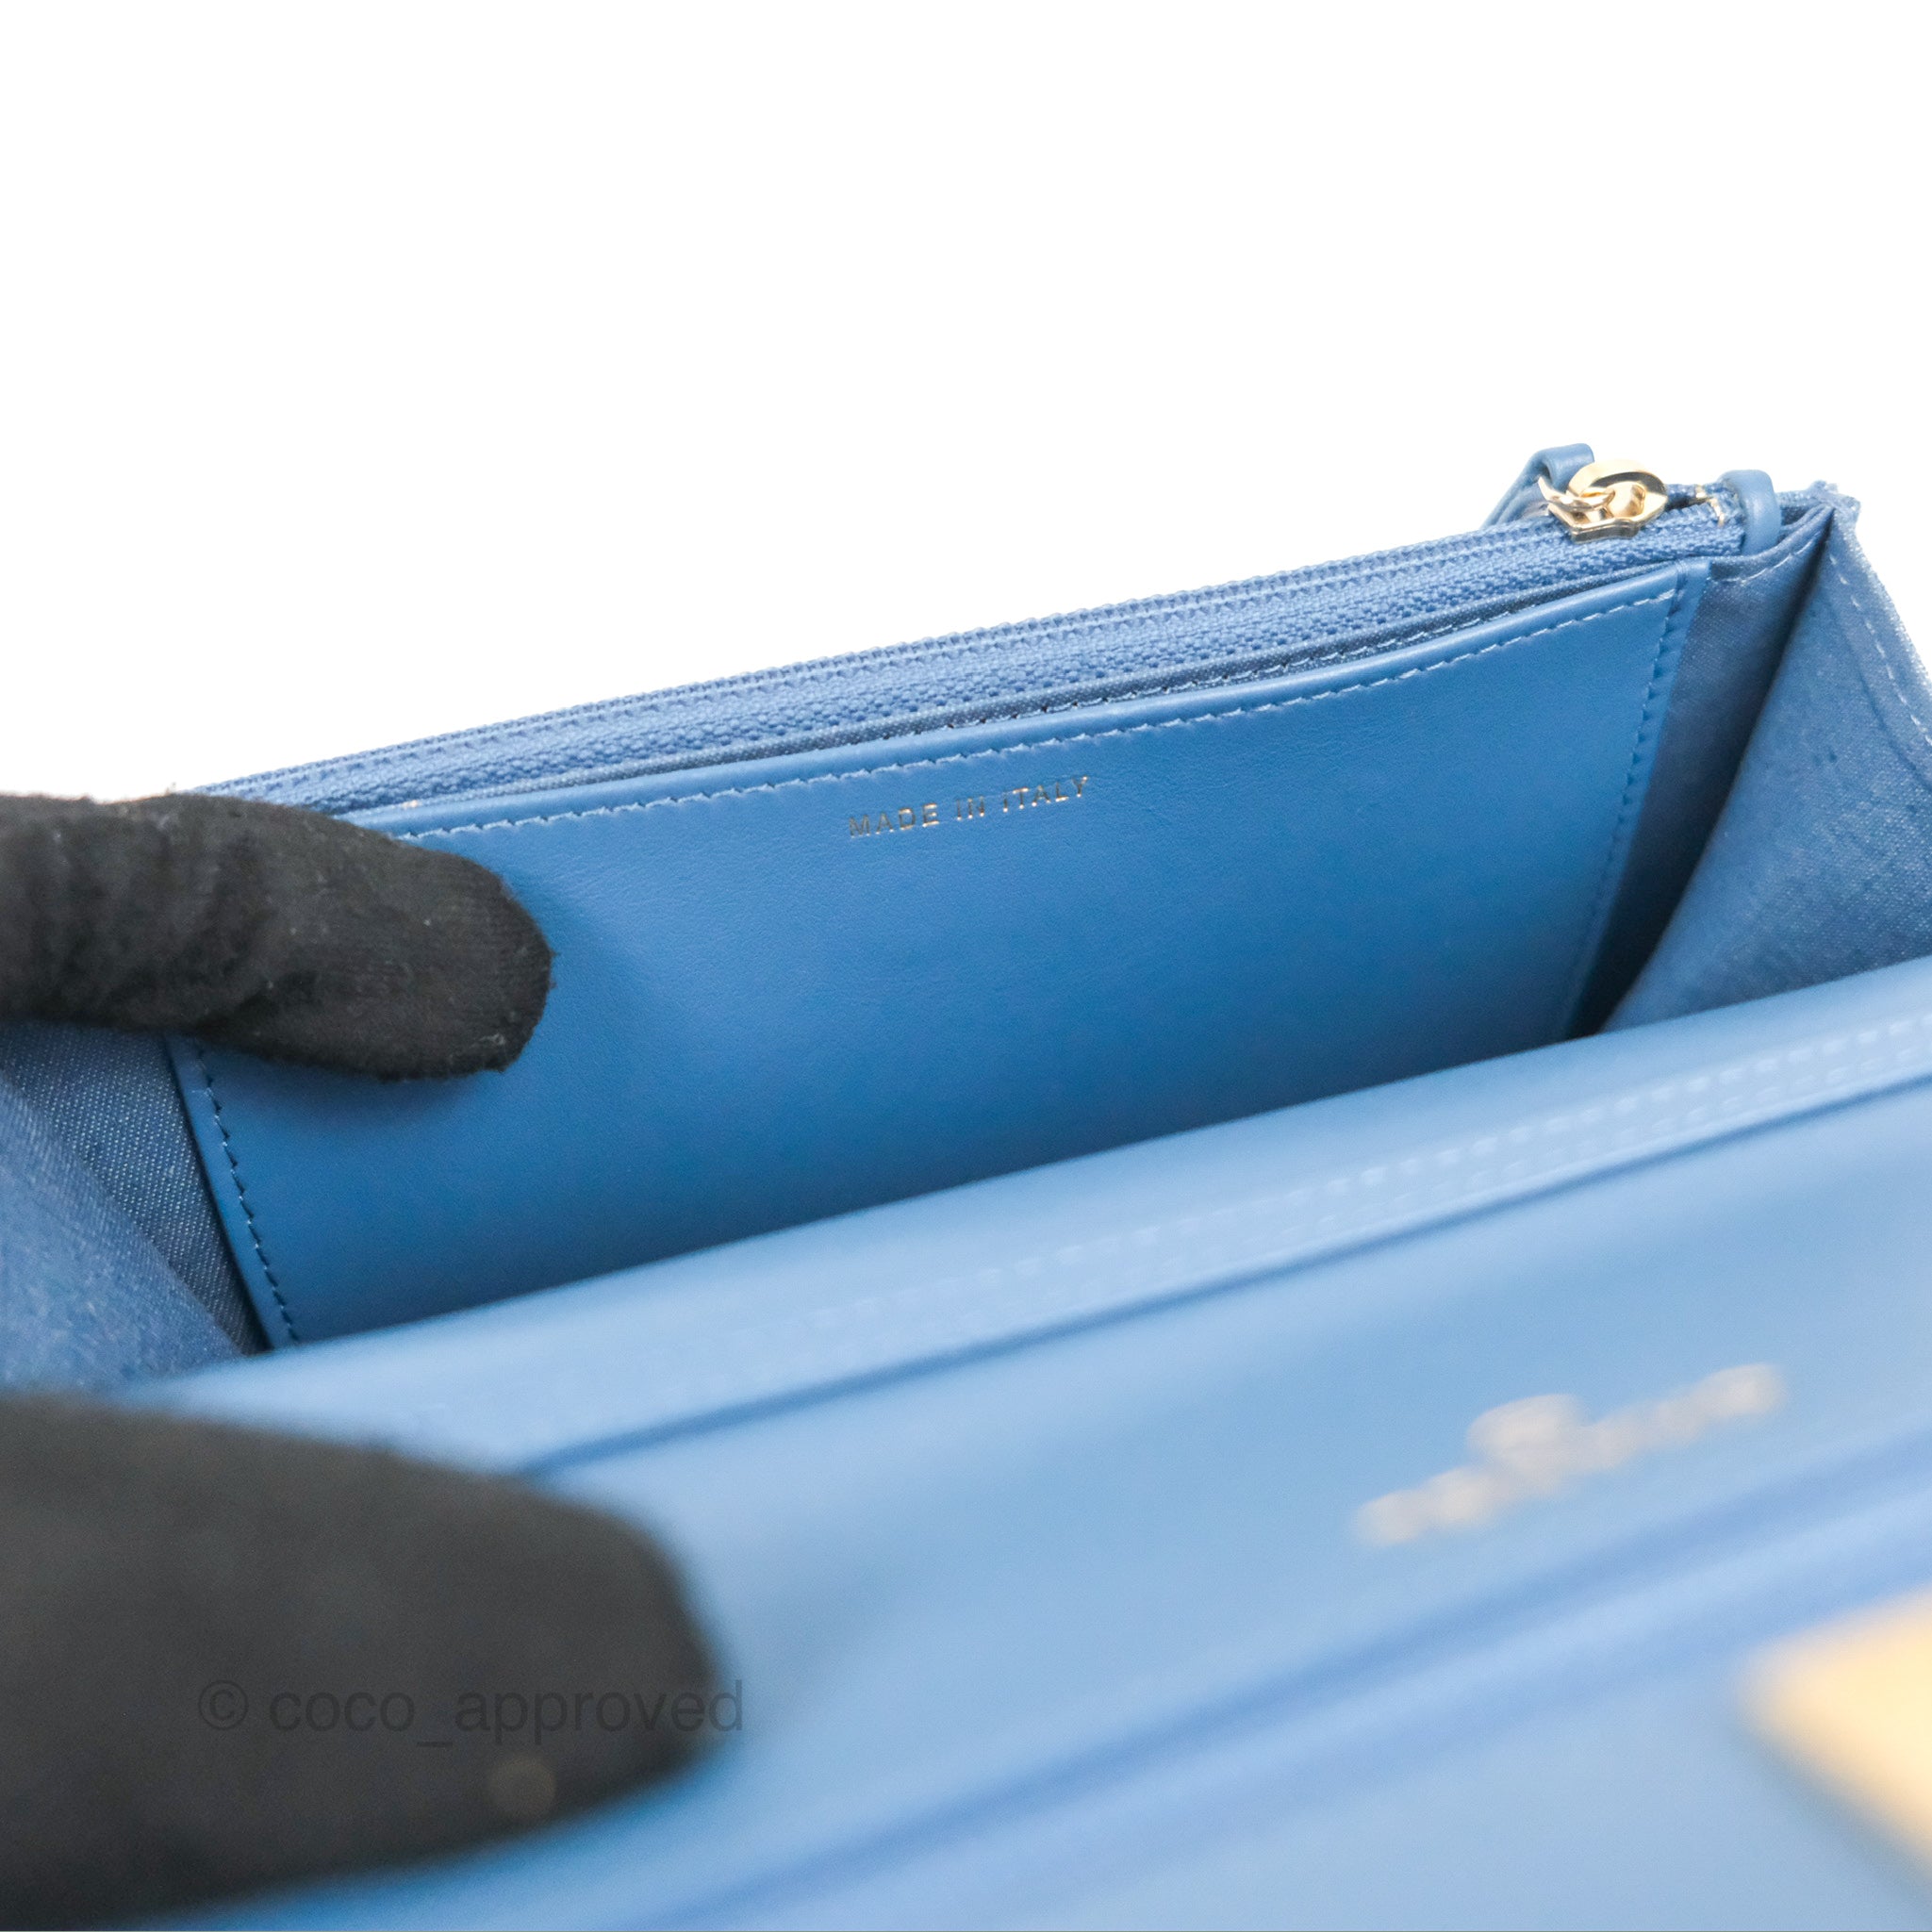 TRIOMPHE COMPACT WALLET IN SHINY CALFSKIN - PEARL BLUE